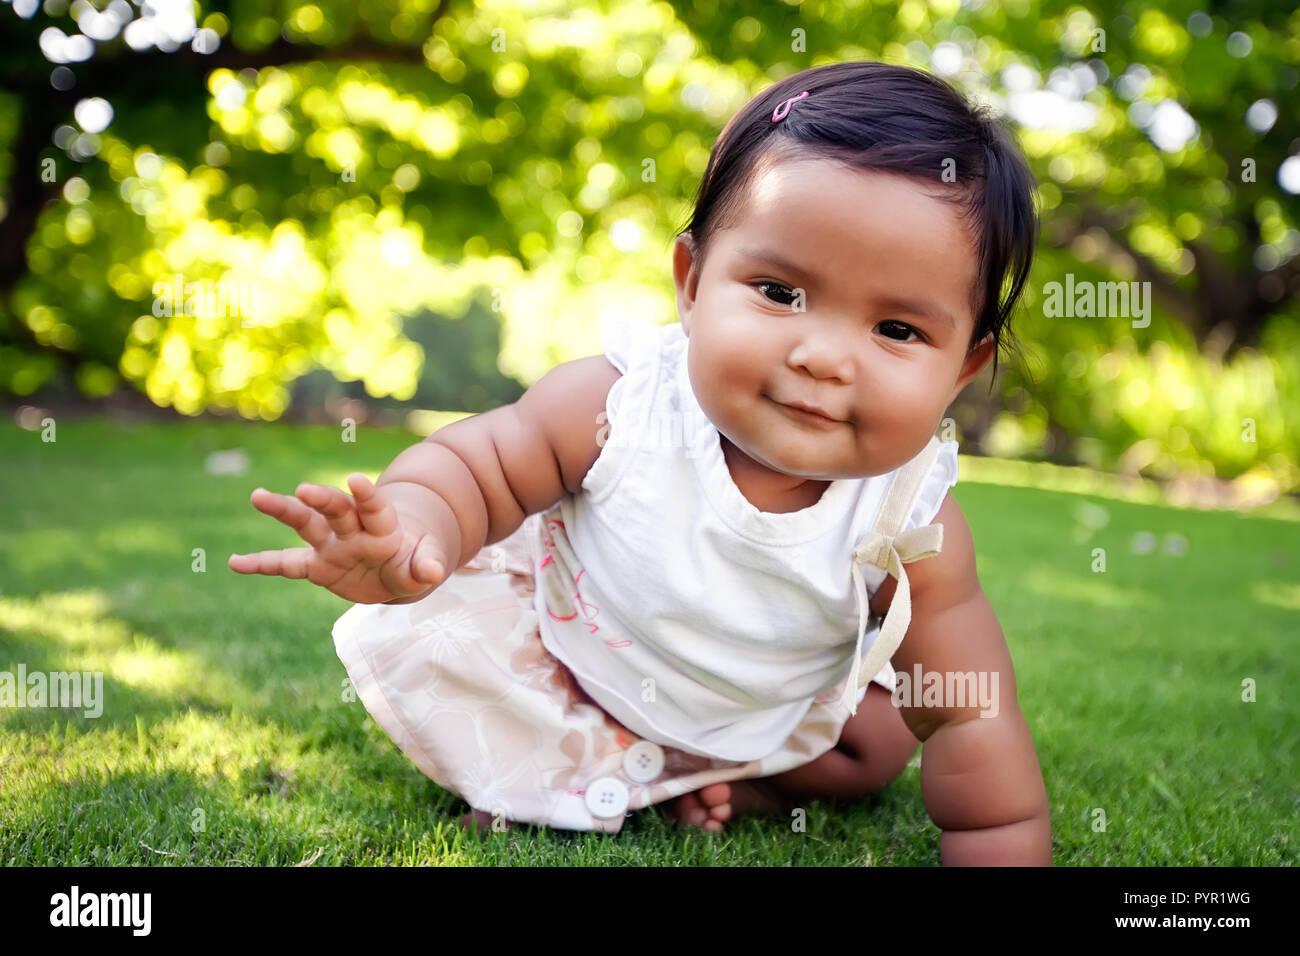 Cute baby girl with a smile on her face, reaching out to take her first crawling step on a lush green lawn at an outdoor park, of mixed ethnic race. Stock Photo